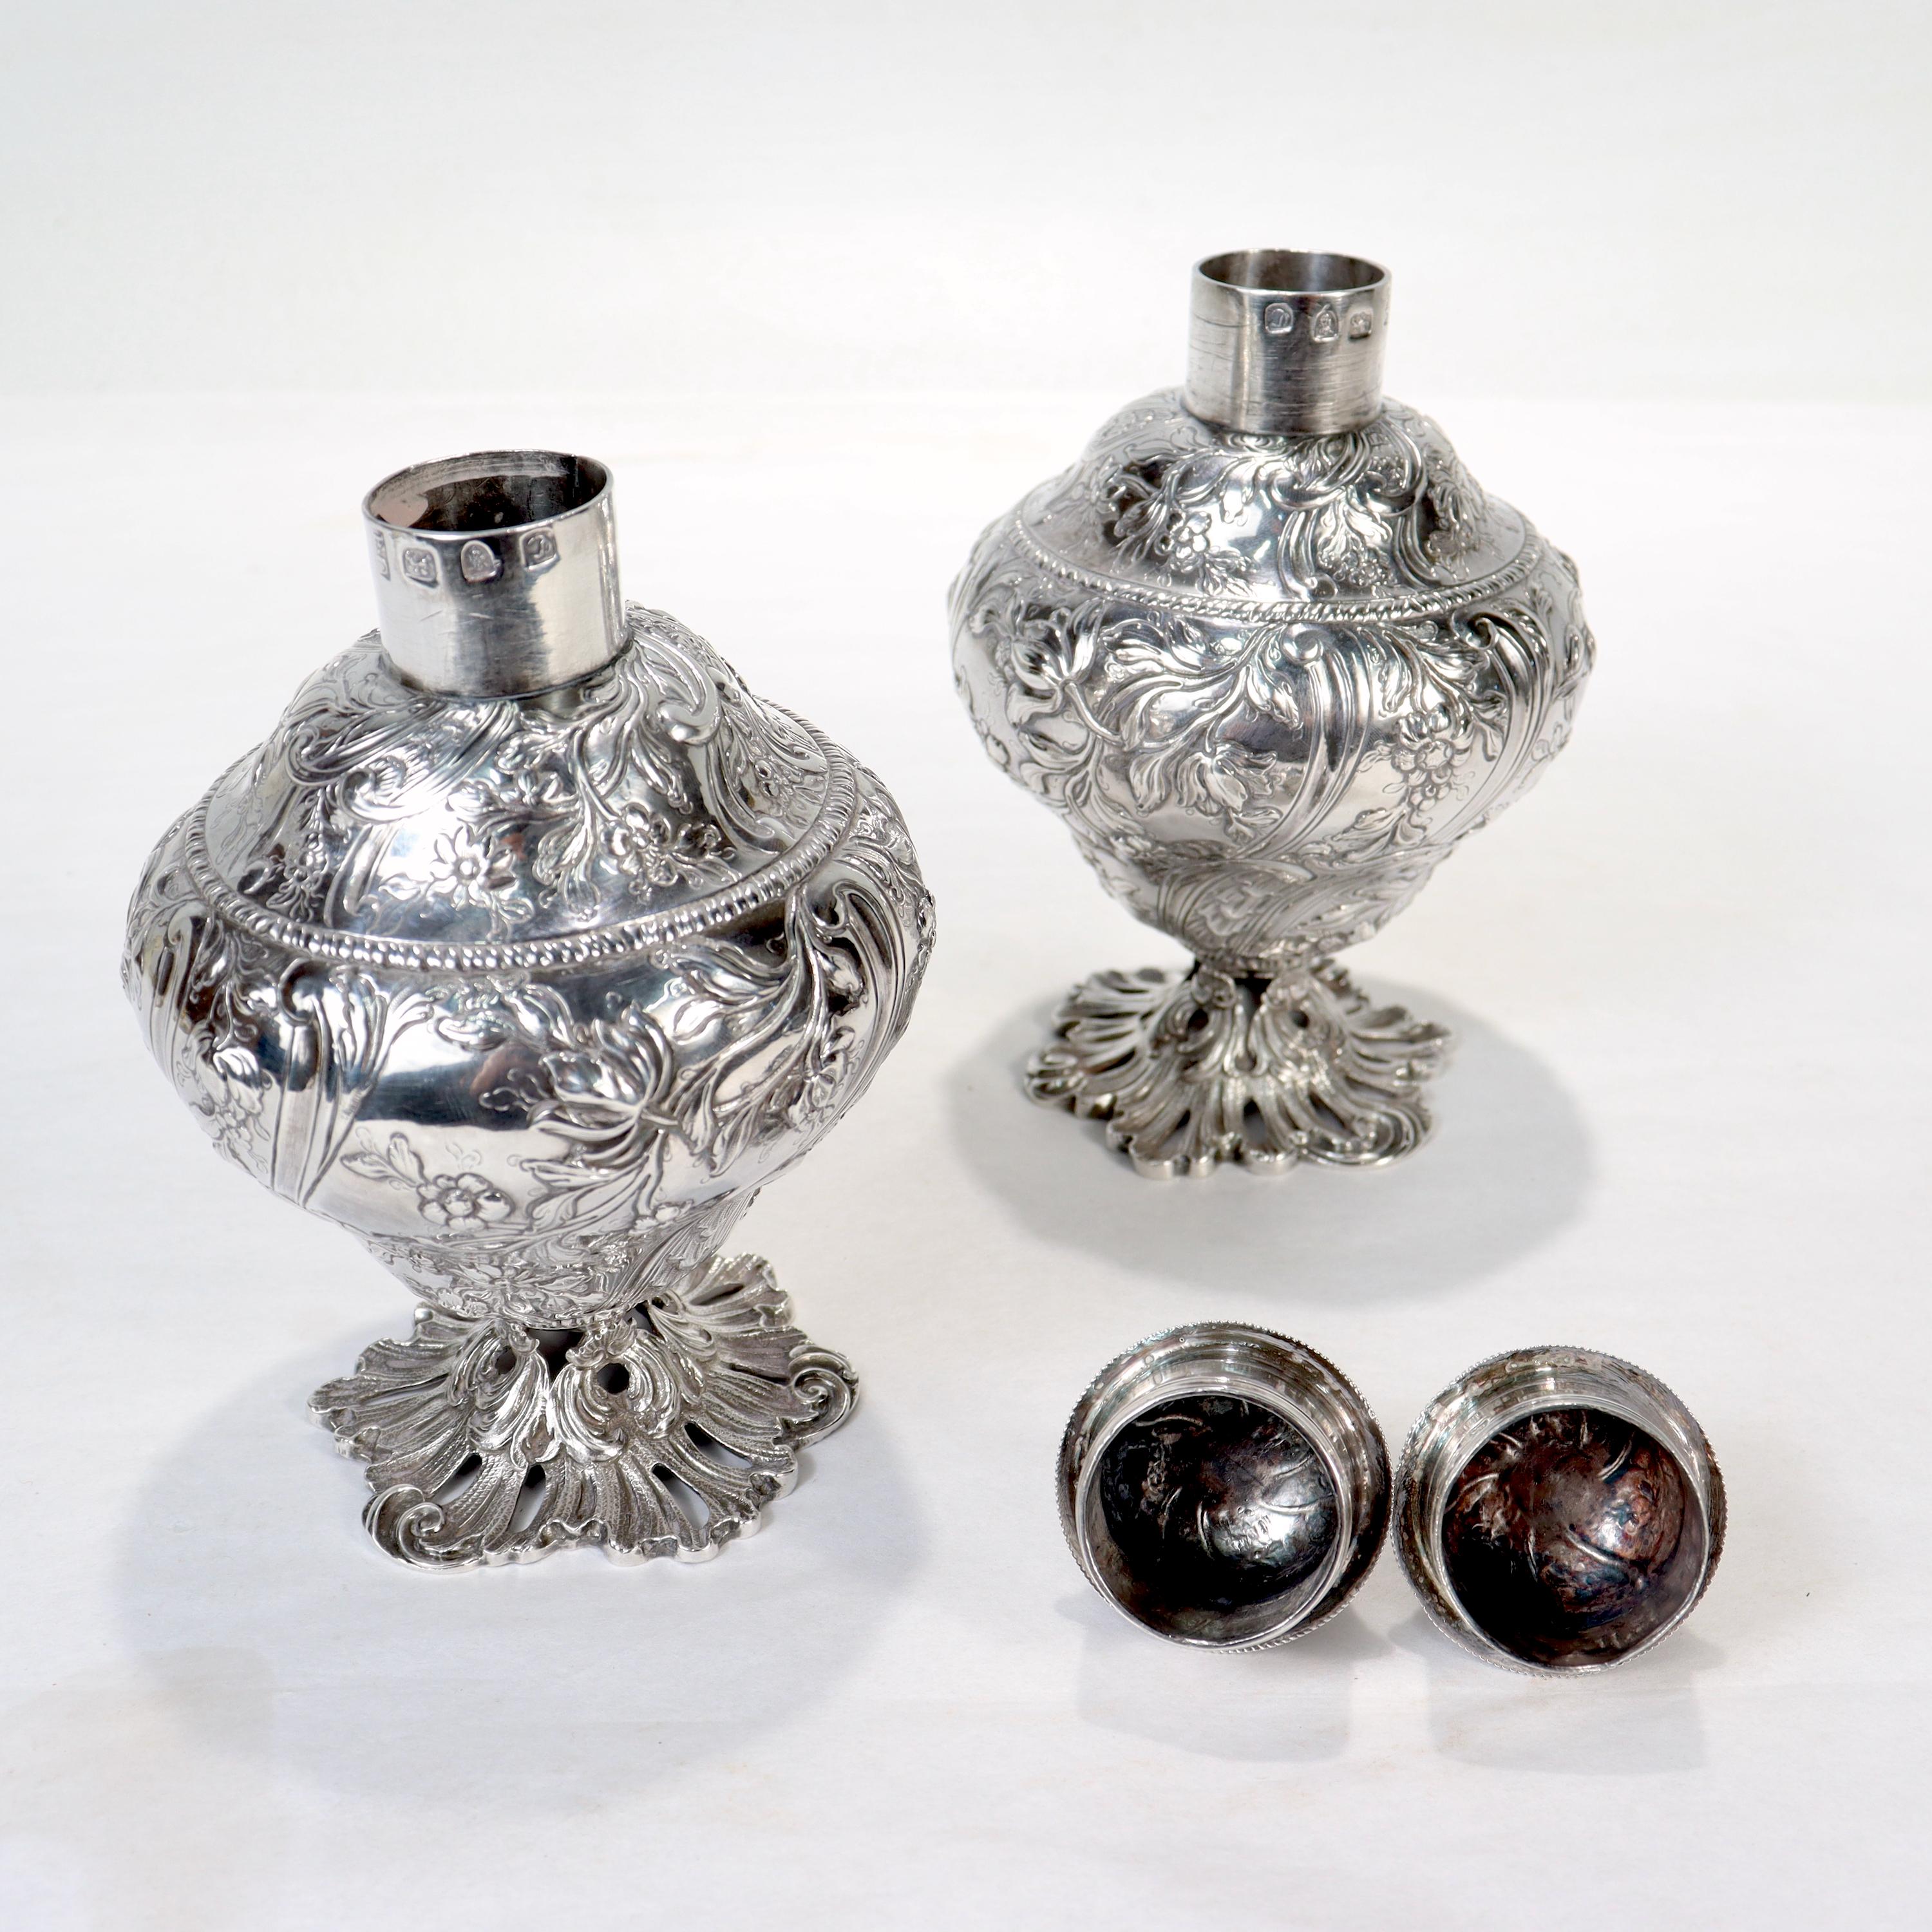 Pair of Antique Georgian English Sterling Silver Tea Caddies by Francis Crump For Sale 7